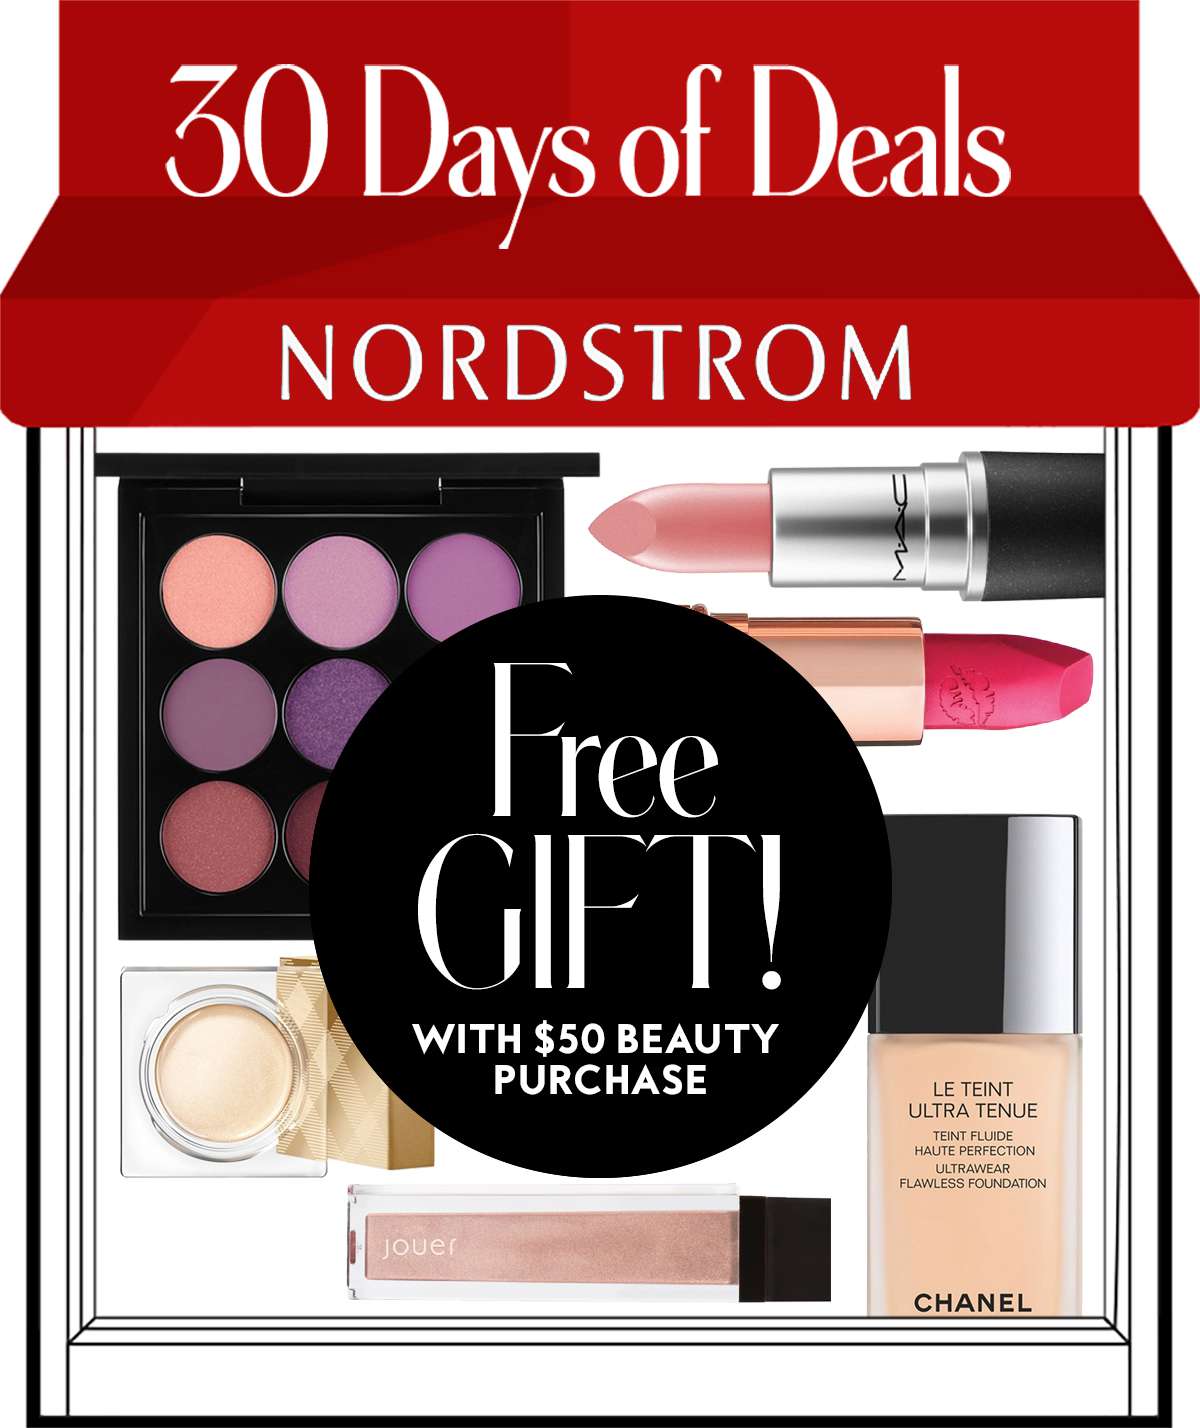 30 Days of Deals -Nordstrom- LEAD